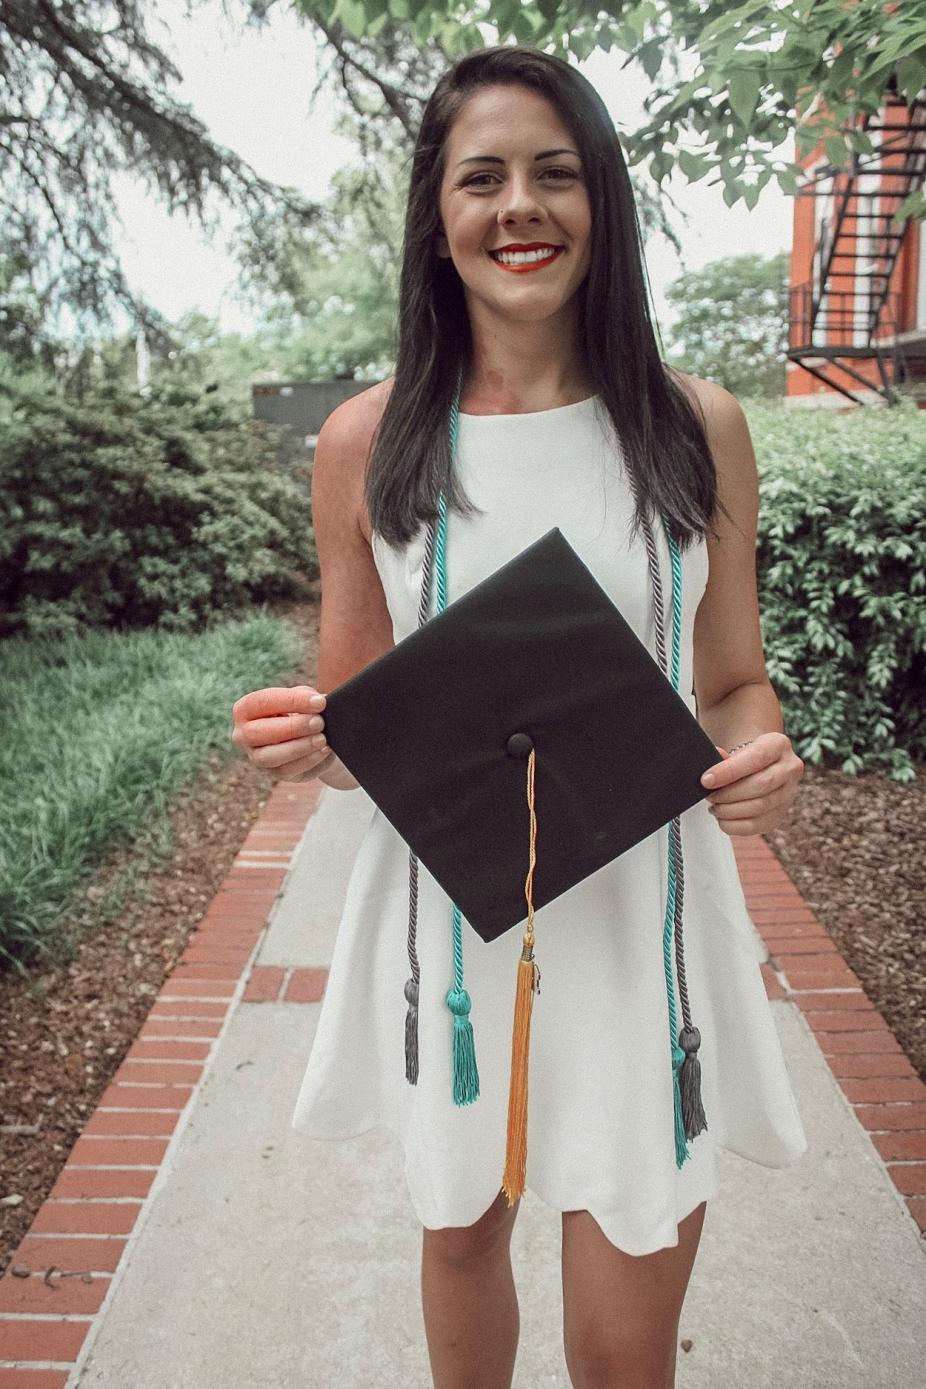 Katherine standing, smiling, and holding a graduation cap.